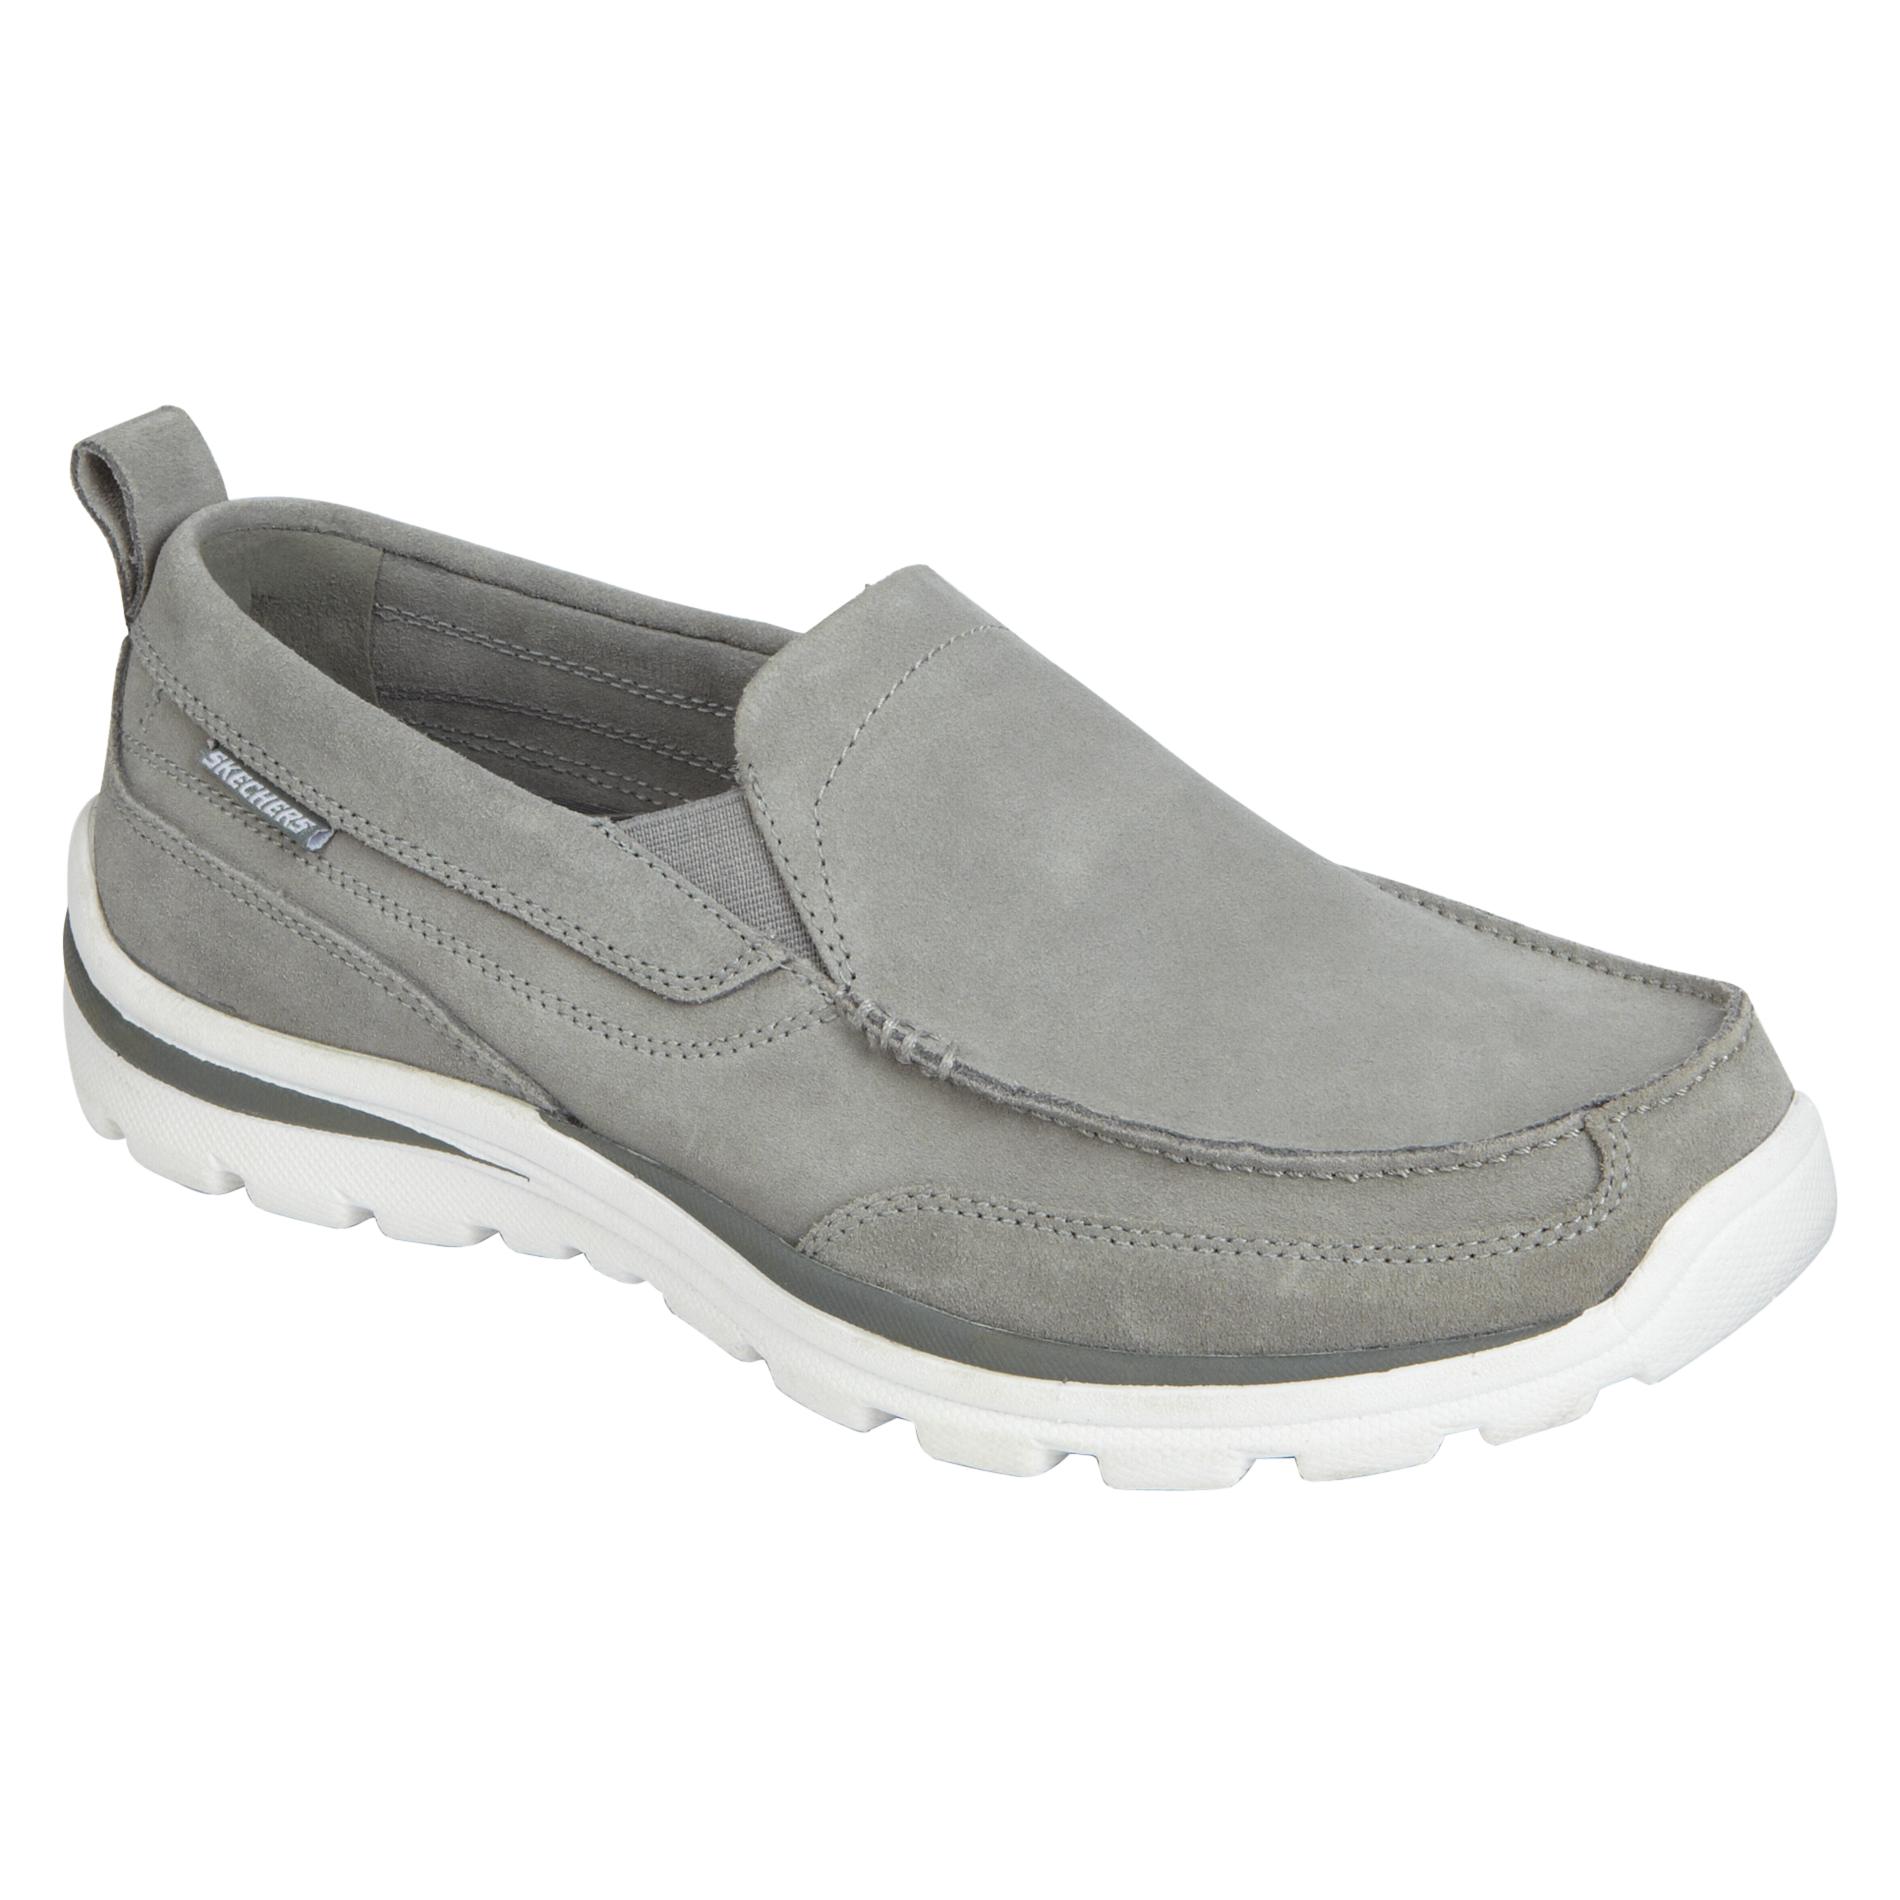 Men's Pace Casual Slip On Gray Shoe